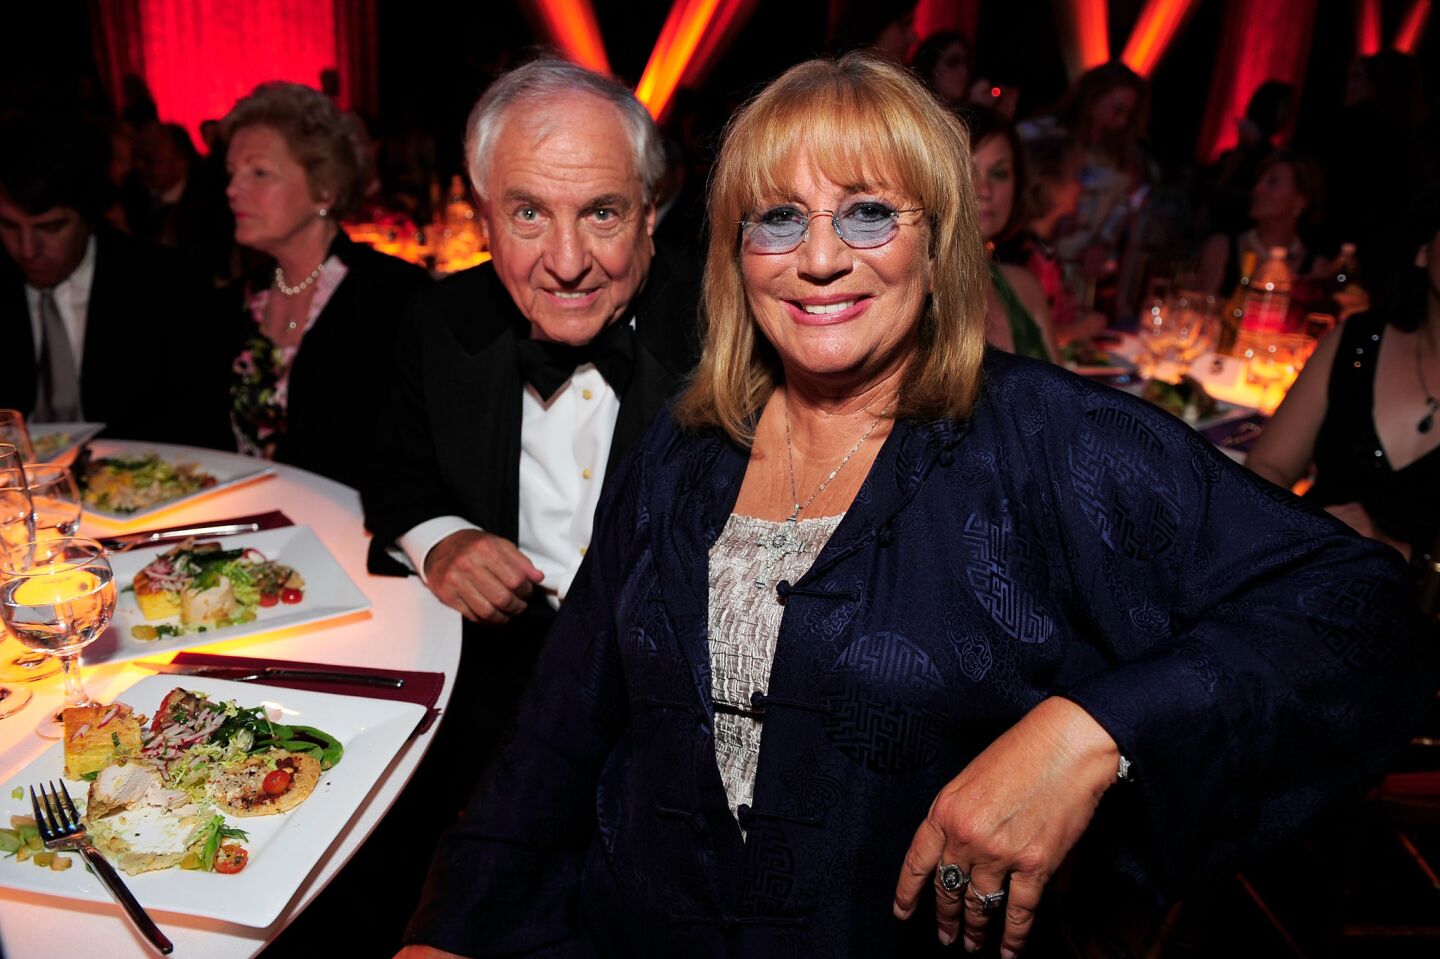 Penny Marshall and her brother, writer-producer Garry Marshall, were among attendees at the 6th annual "TV Land Awards" in 2008, held at Barker Hangar in Santa Monica.